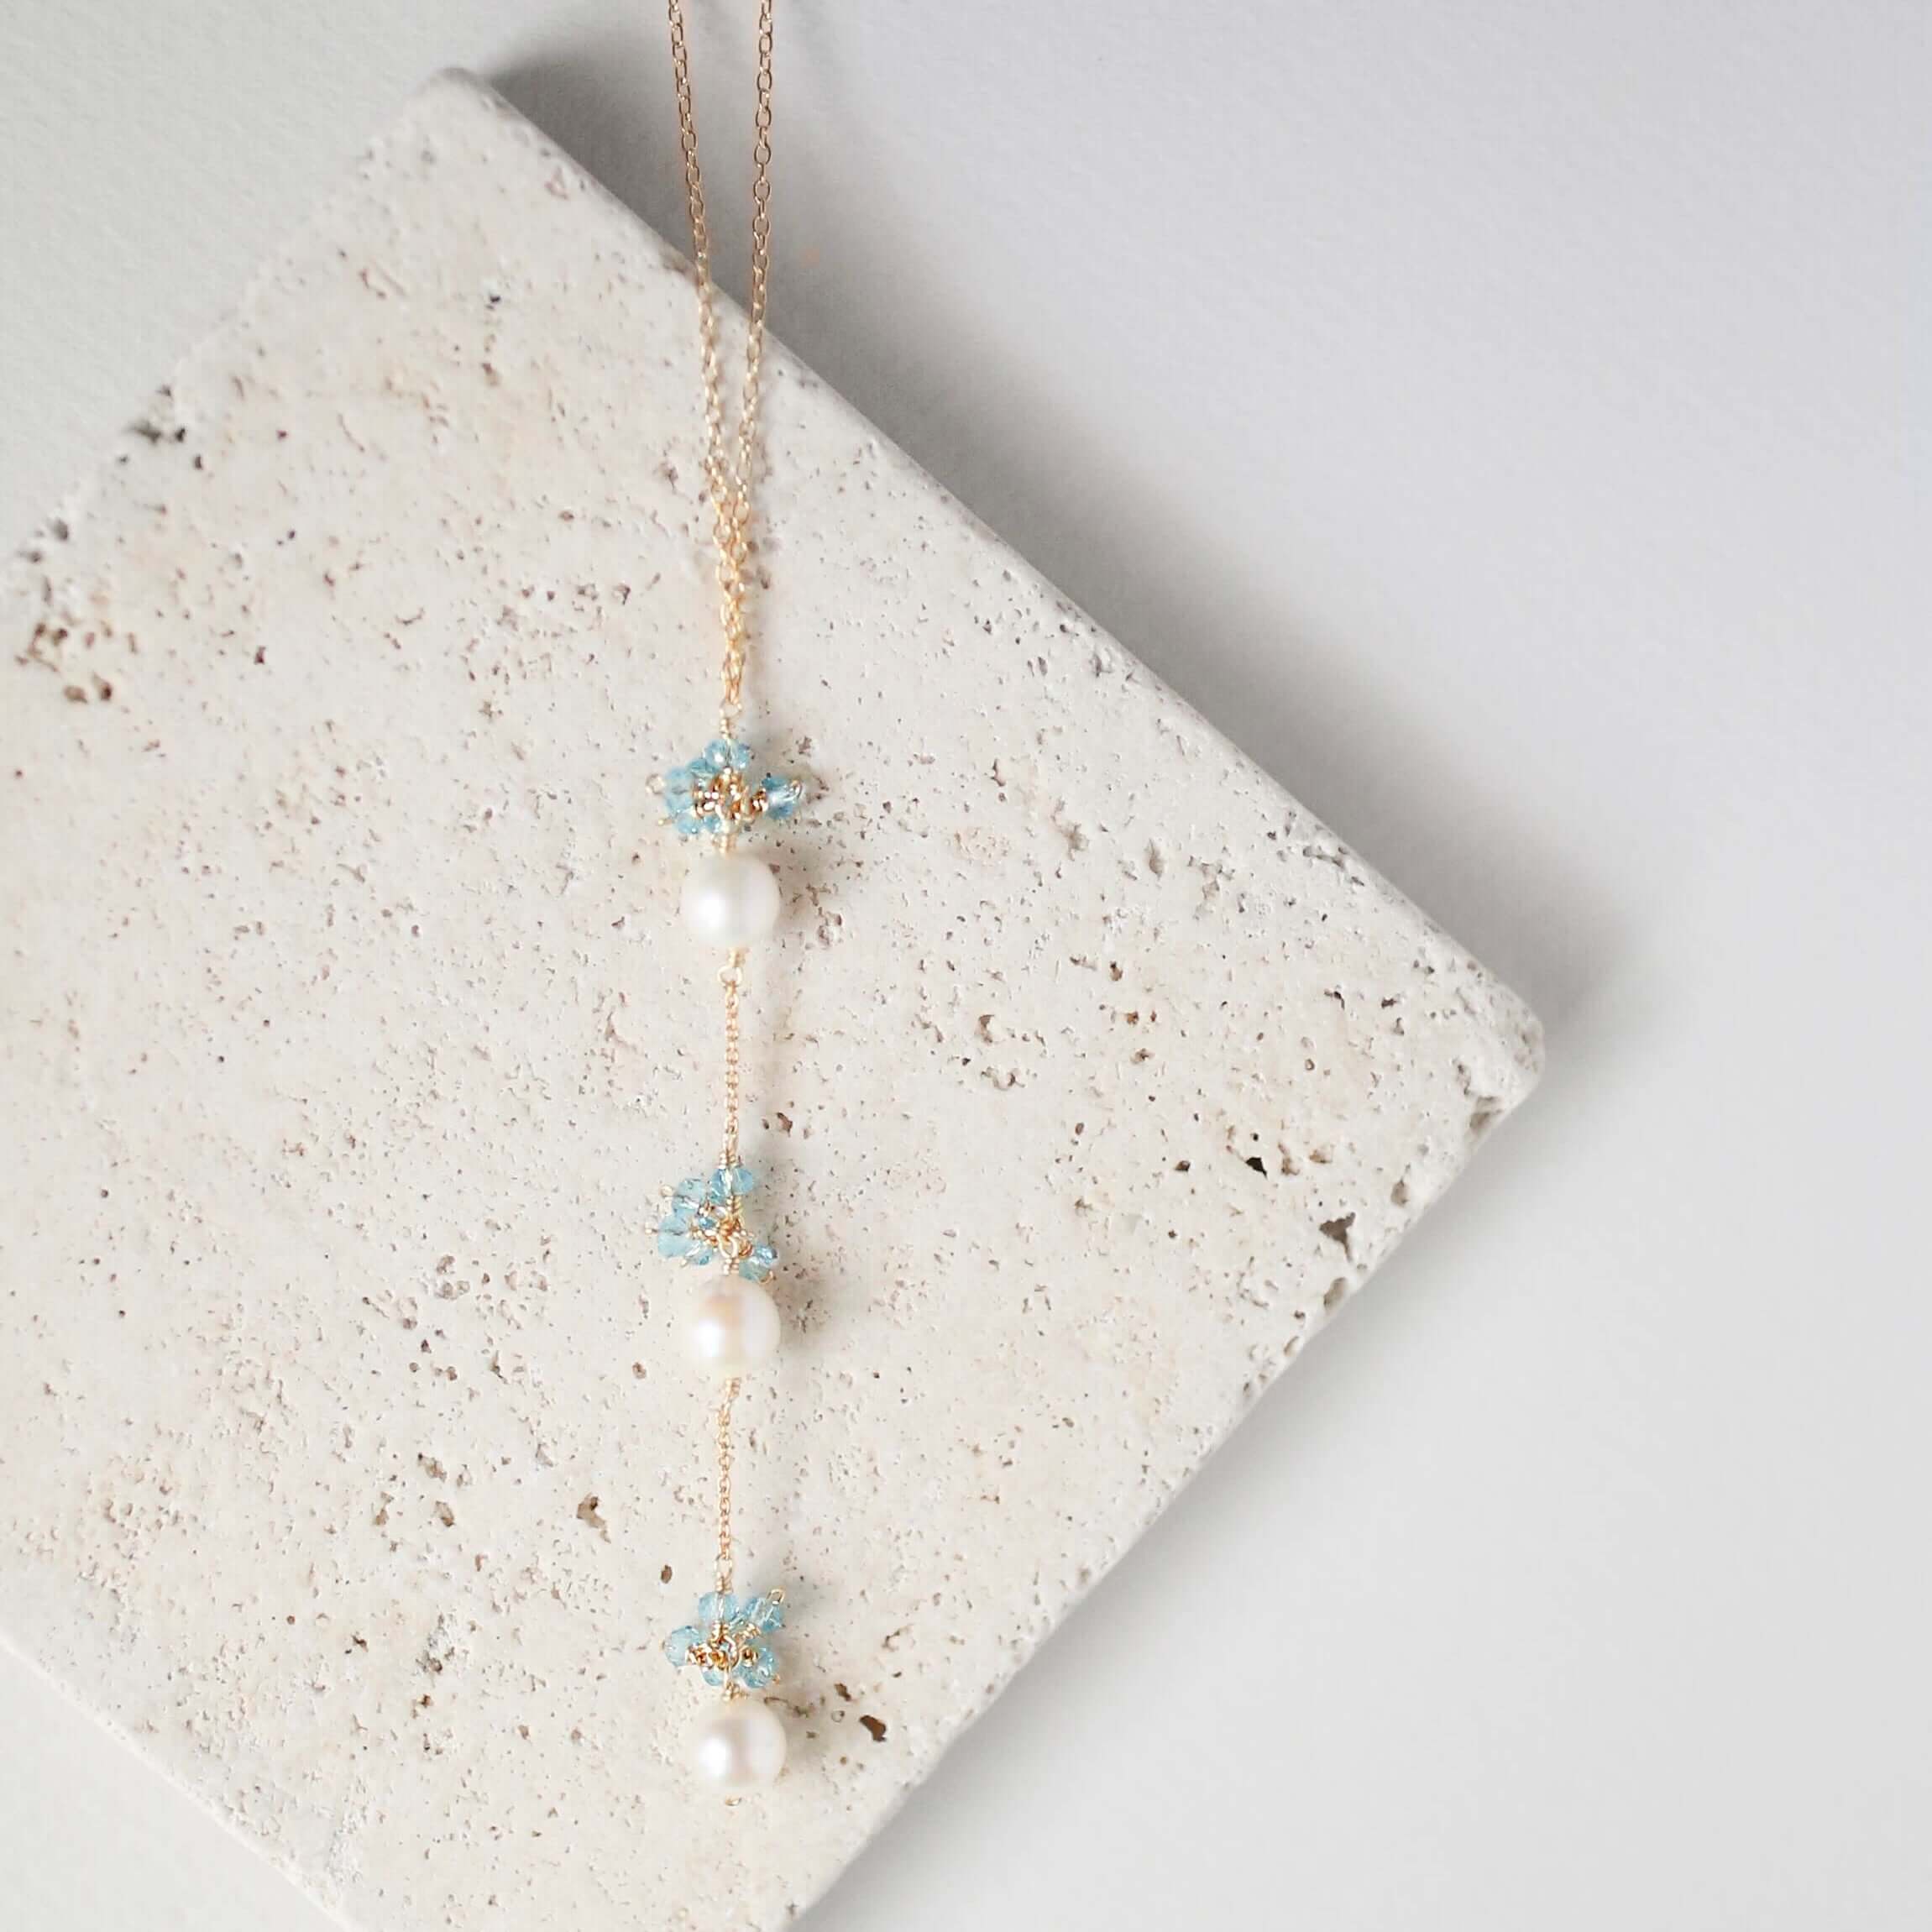 Gold plated Necklace with 3 white freshwater bead pearls paired with genuine aquamarine quartz gemstones